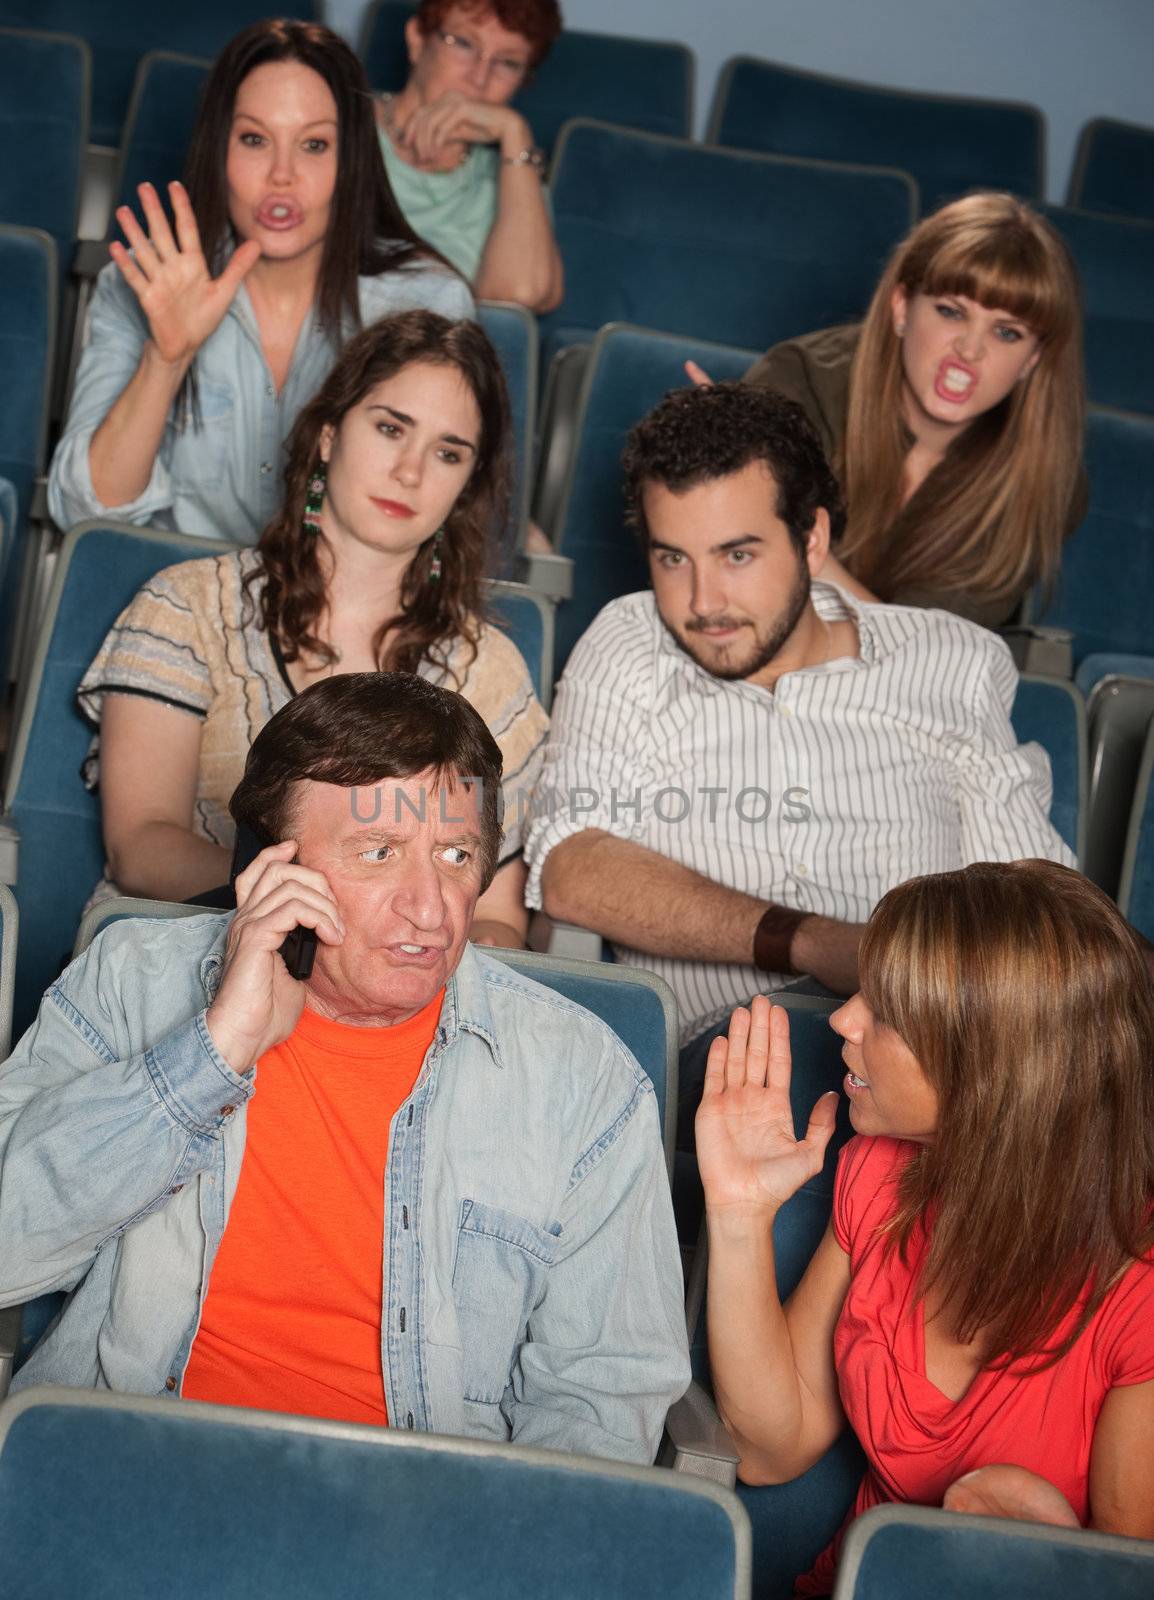 Man on phone call irks audience in theater